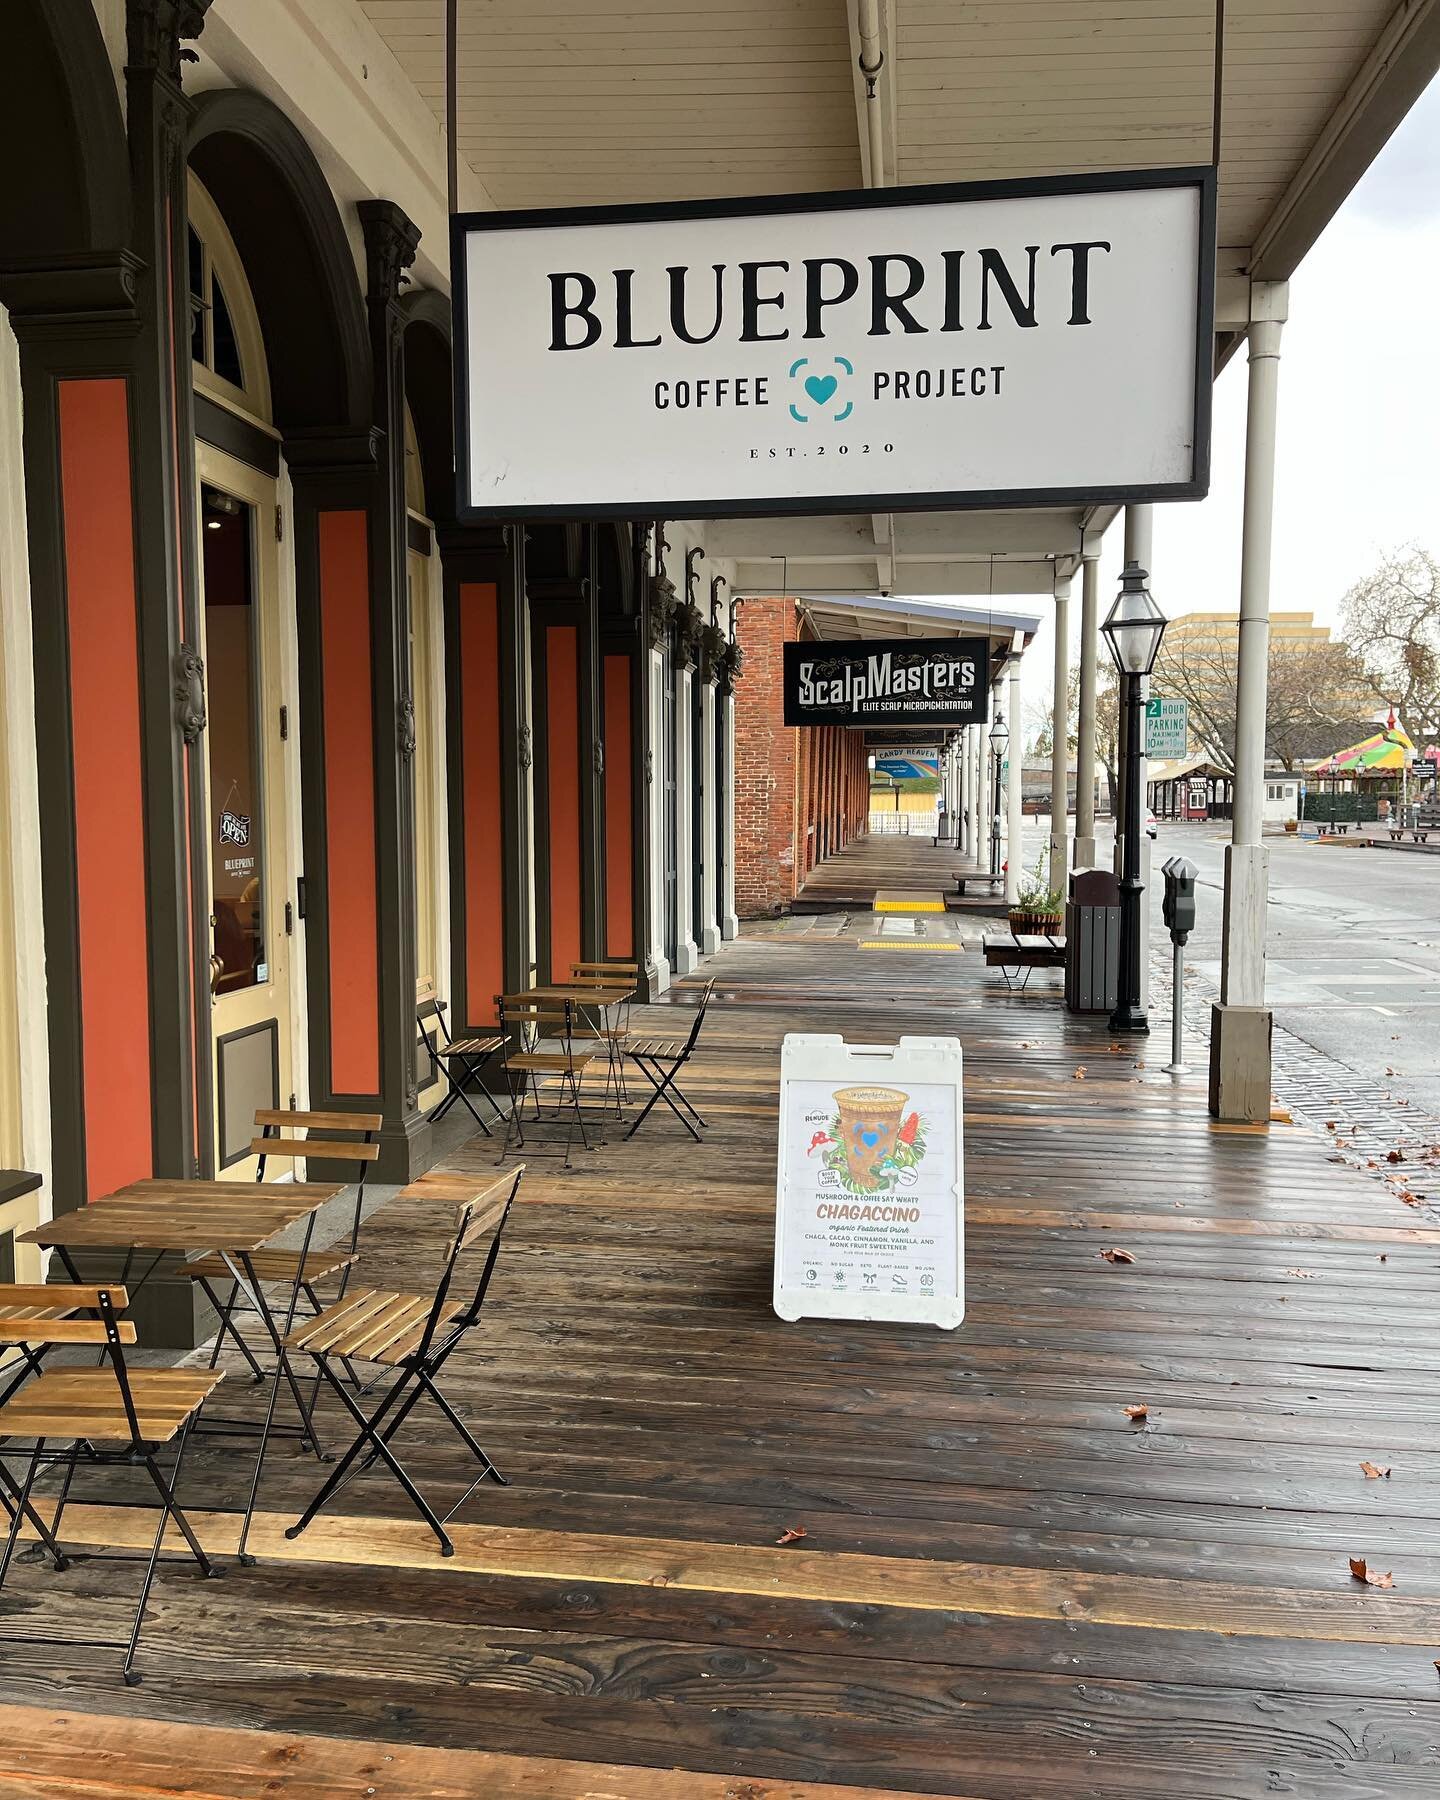 If you are finding yourself without power and needing to get some work done, come on down to The Co-Lab we have got power and plenty of desk and seats left.  Enter in through @blueprintcoffeeproject Check in at the coffee shop for WiFi and password a